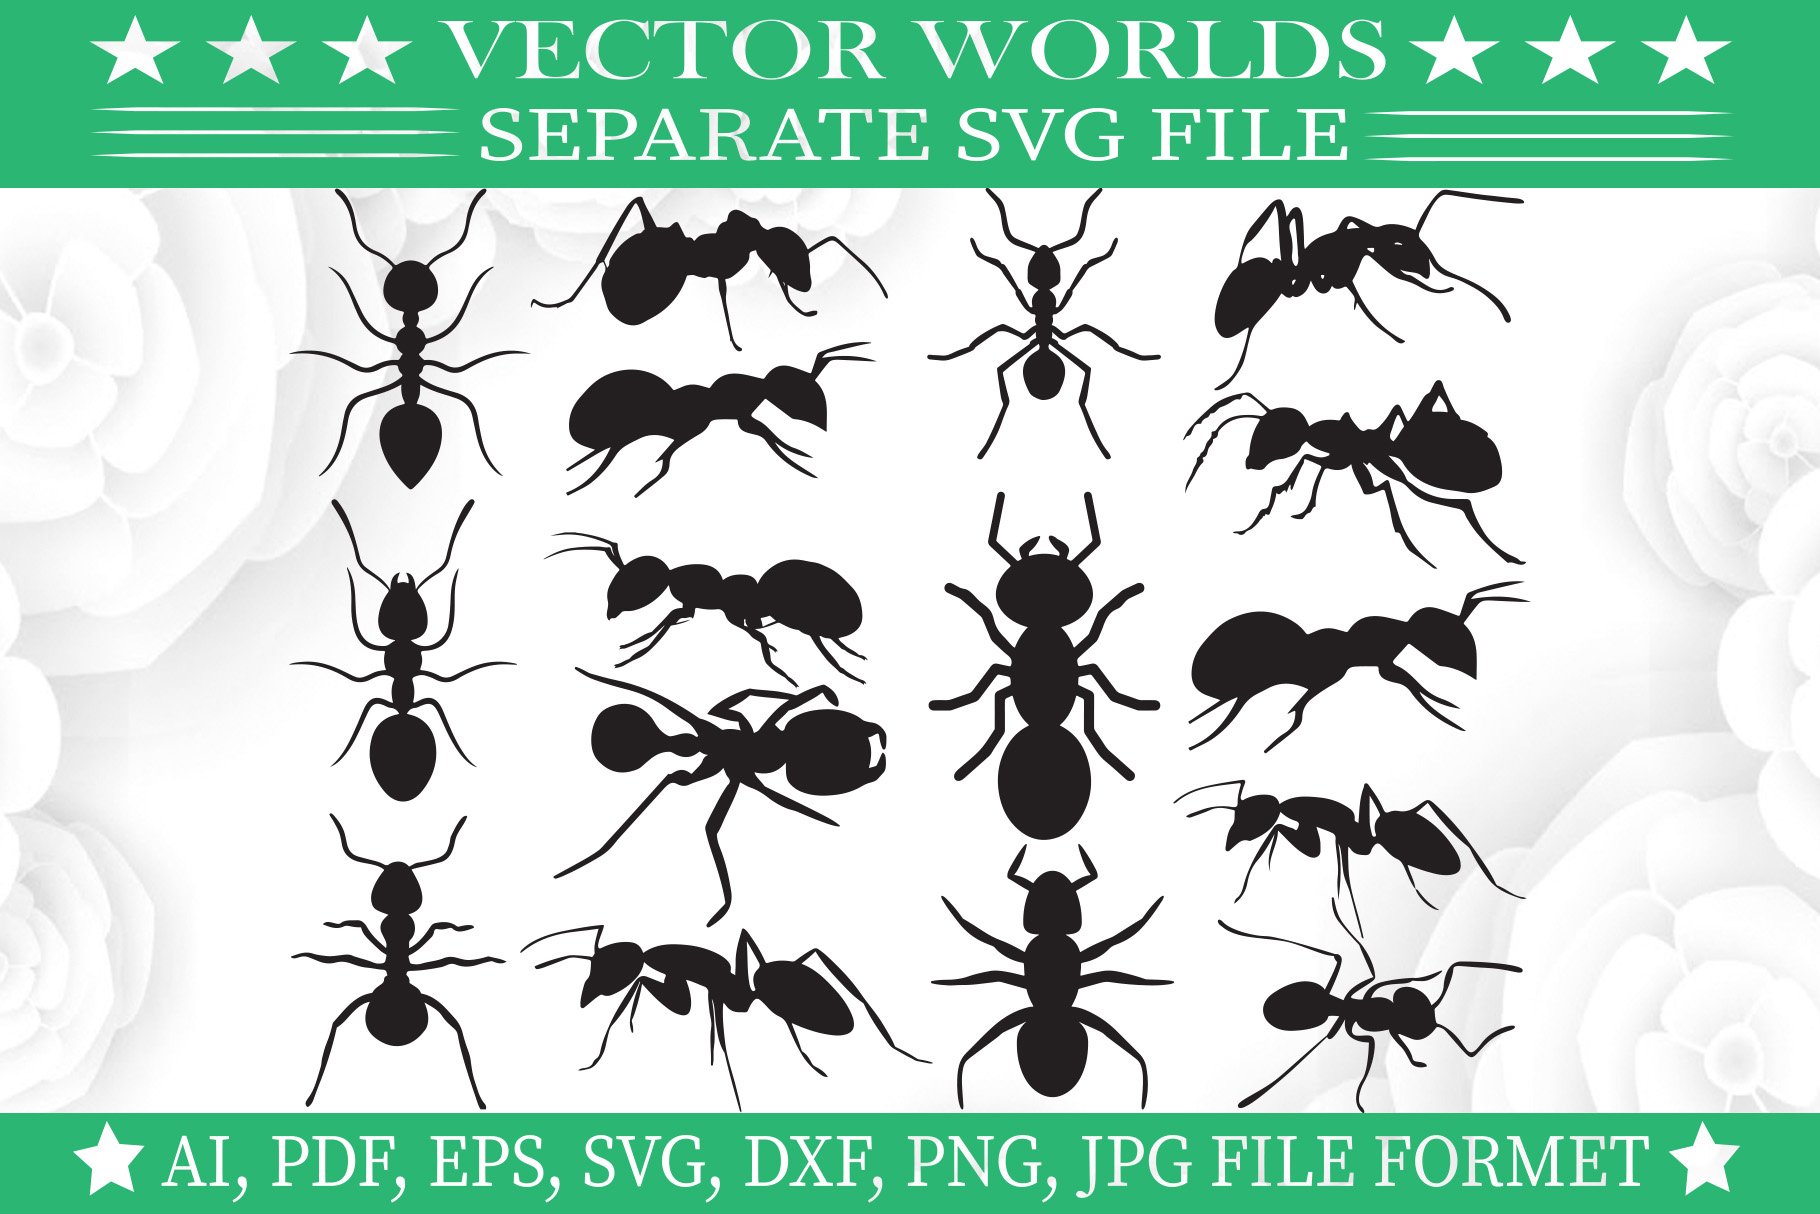 Ants Svg, Ant, Animal, Anime Svg cover image.